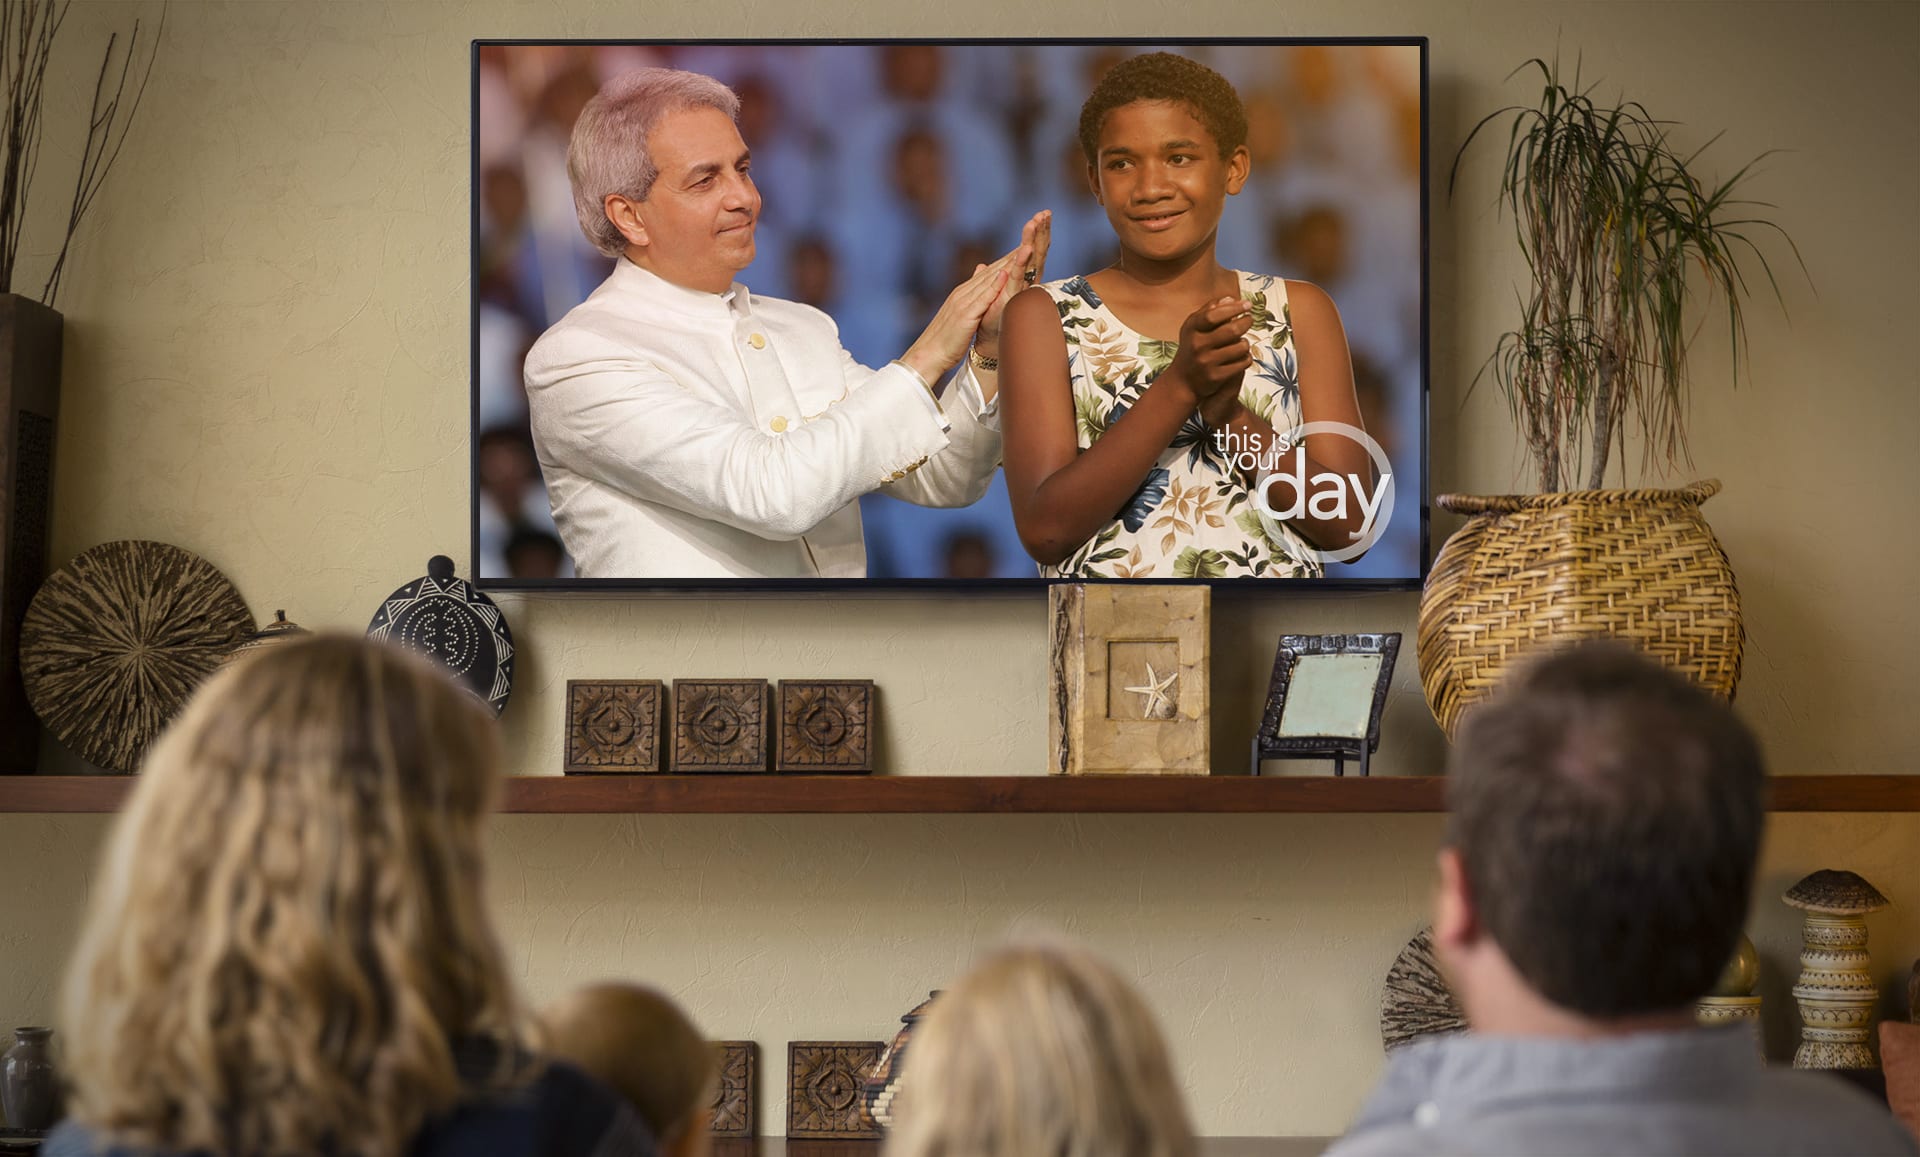 This-Is-Your-Day-on-TV-with-family-Benny-Hinn-Ministries